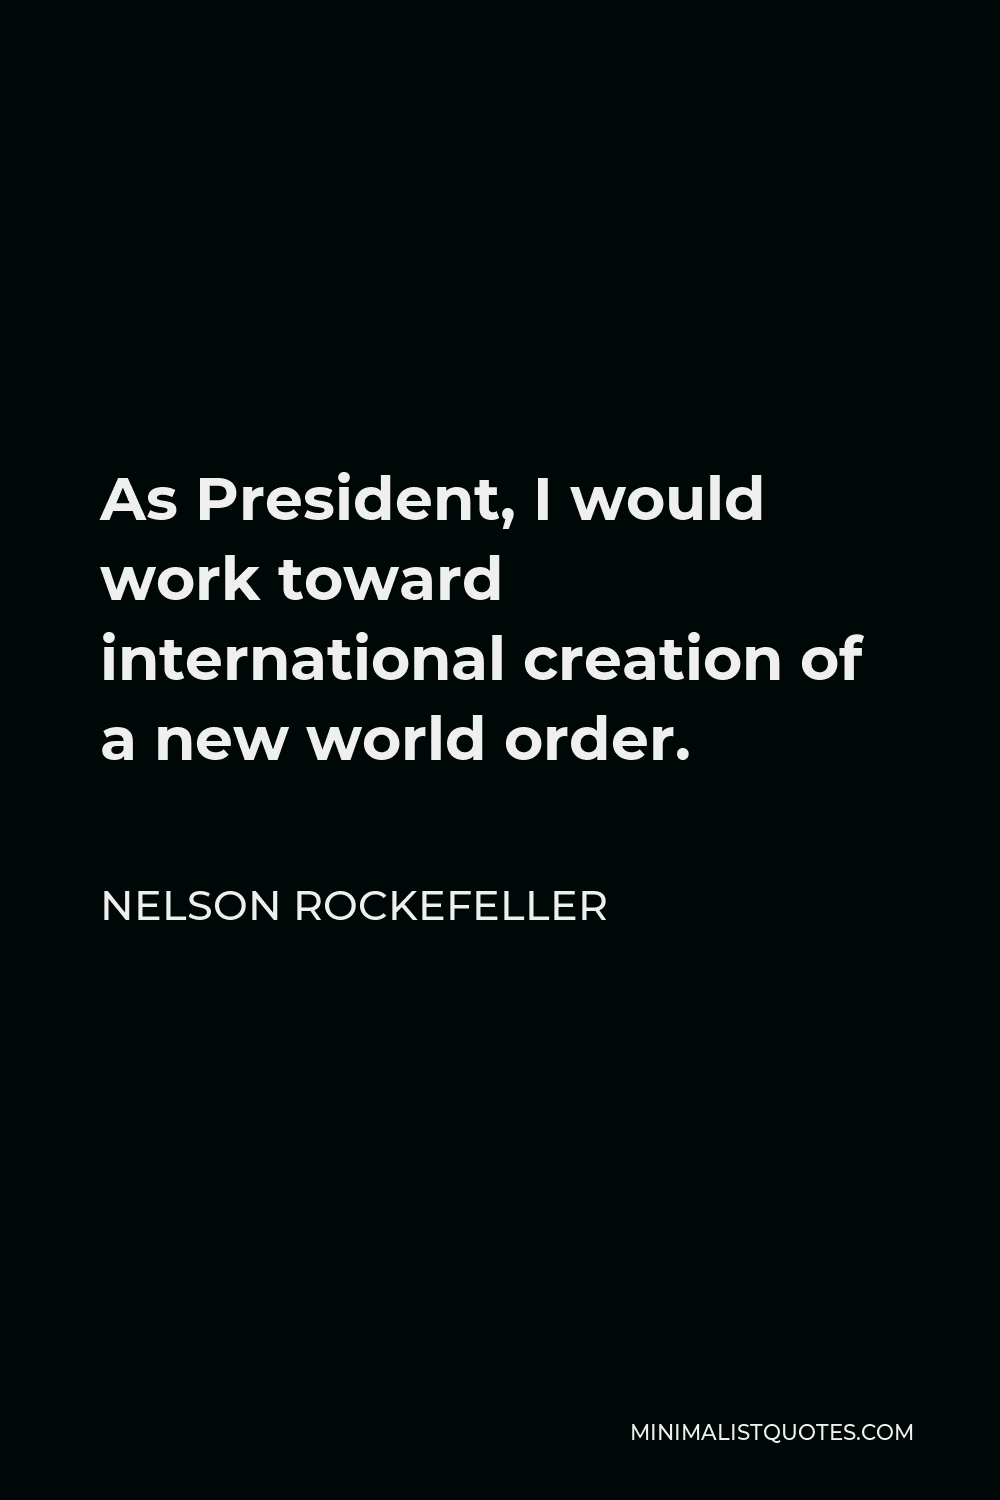 Nelson Rockefeller Quote - As President, I would work toward international creation of a new world order.